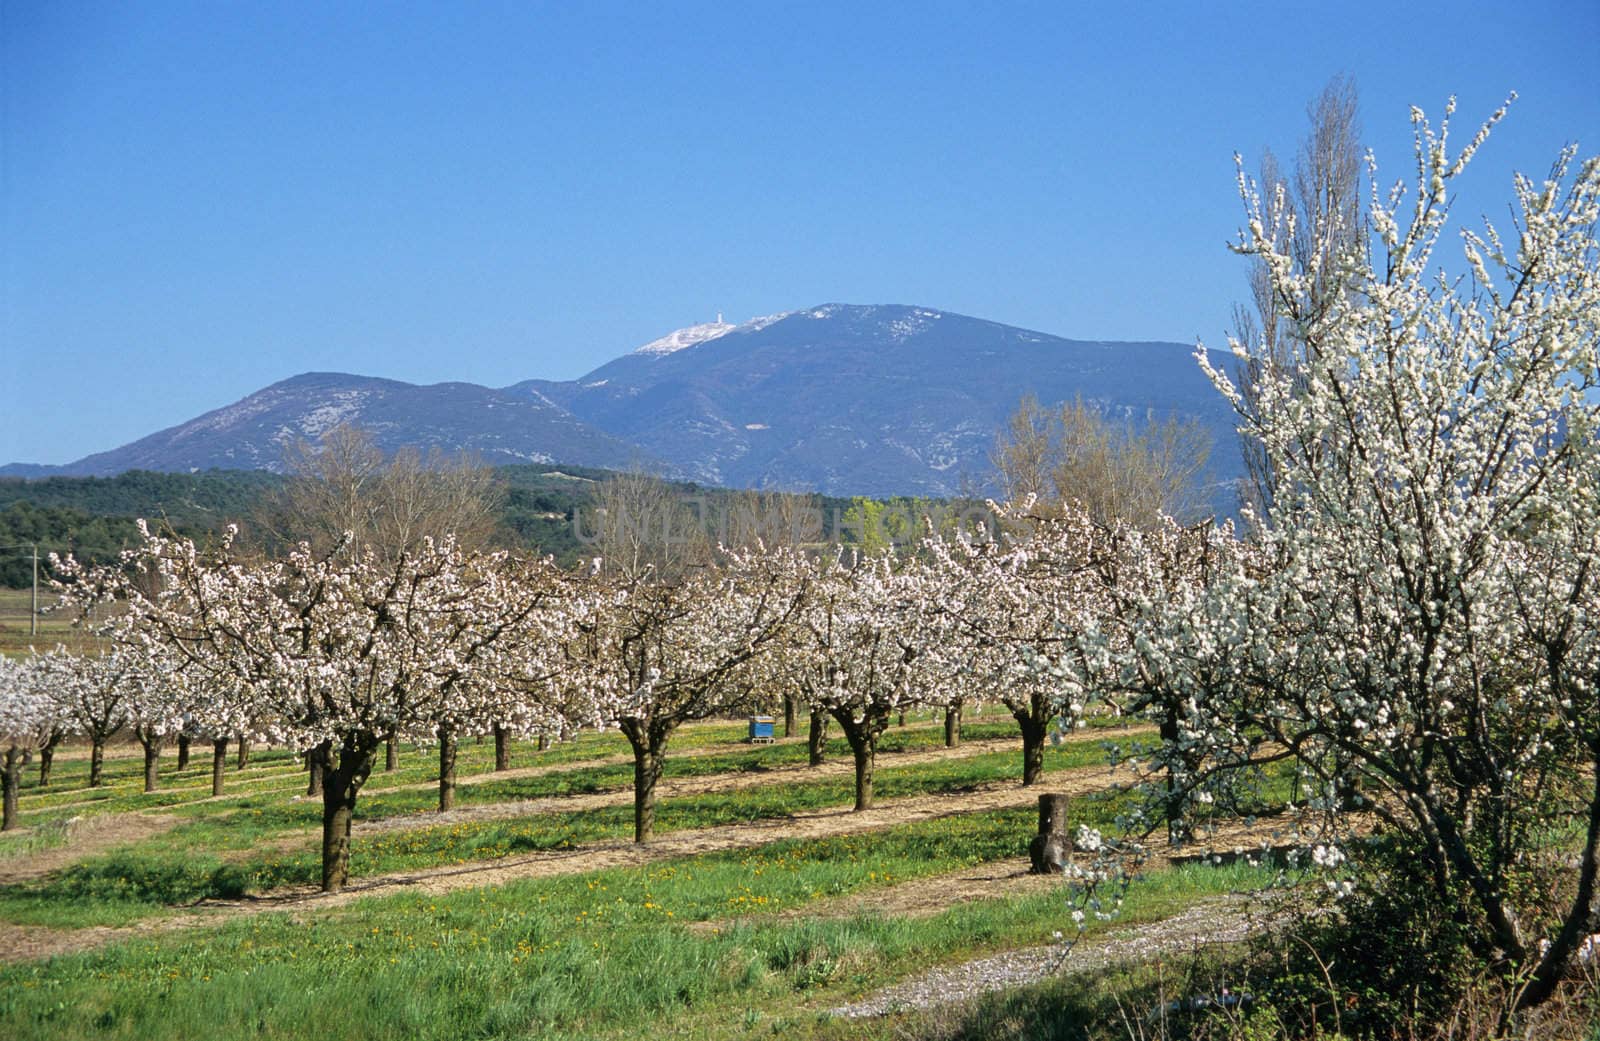 An almond grove blooms in springtime below Mt. Ventoux in Provence, France